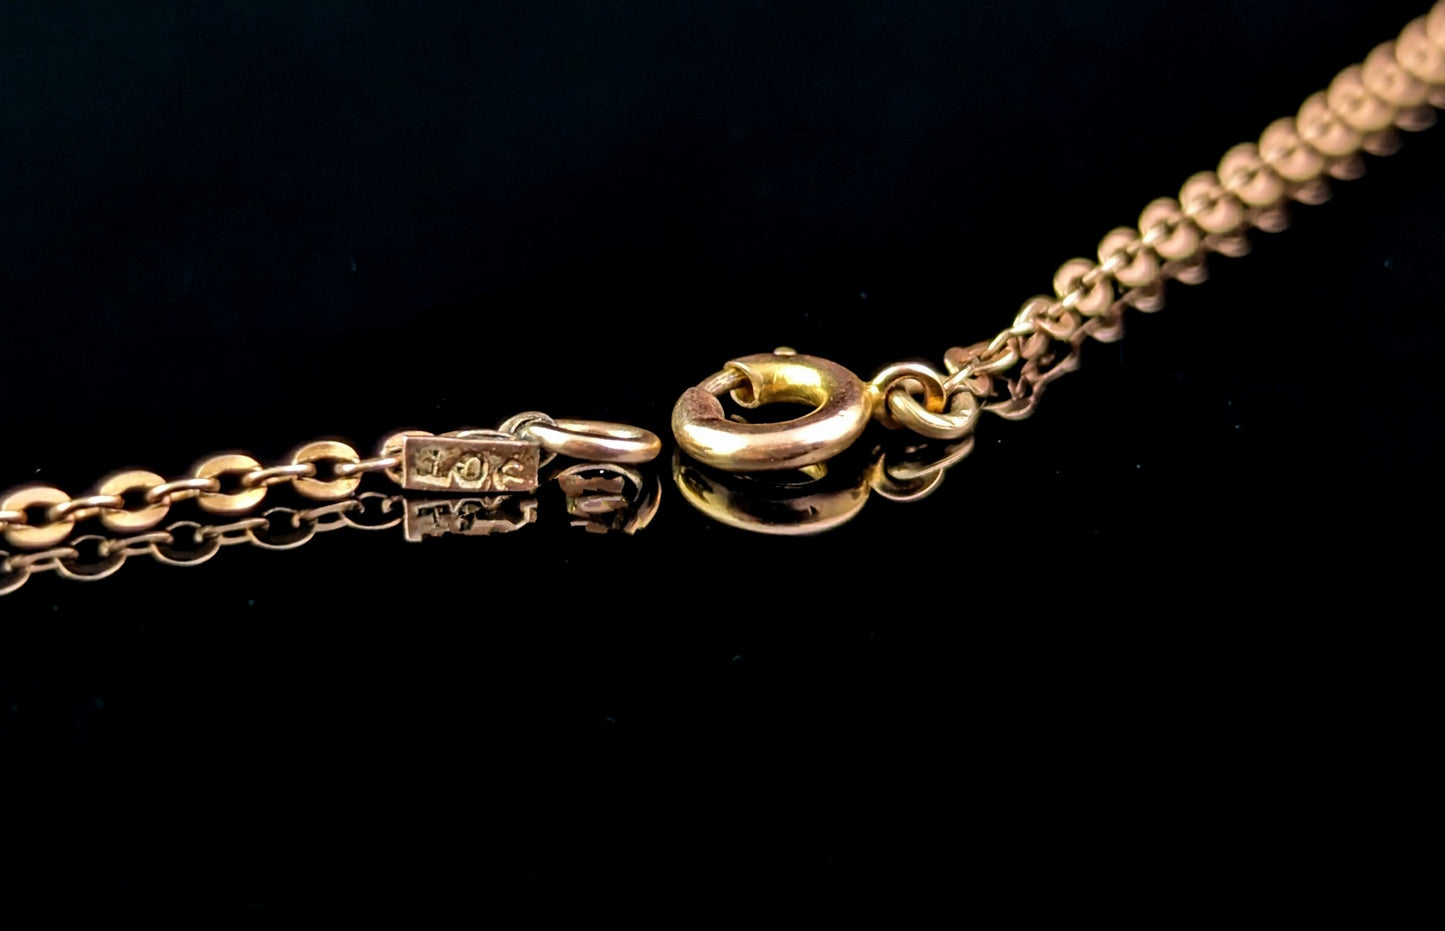 Antique 9ct yellow gold trace link chain necklace, Edwardian